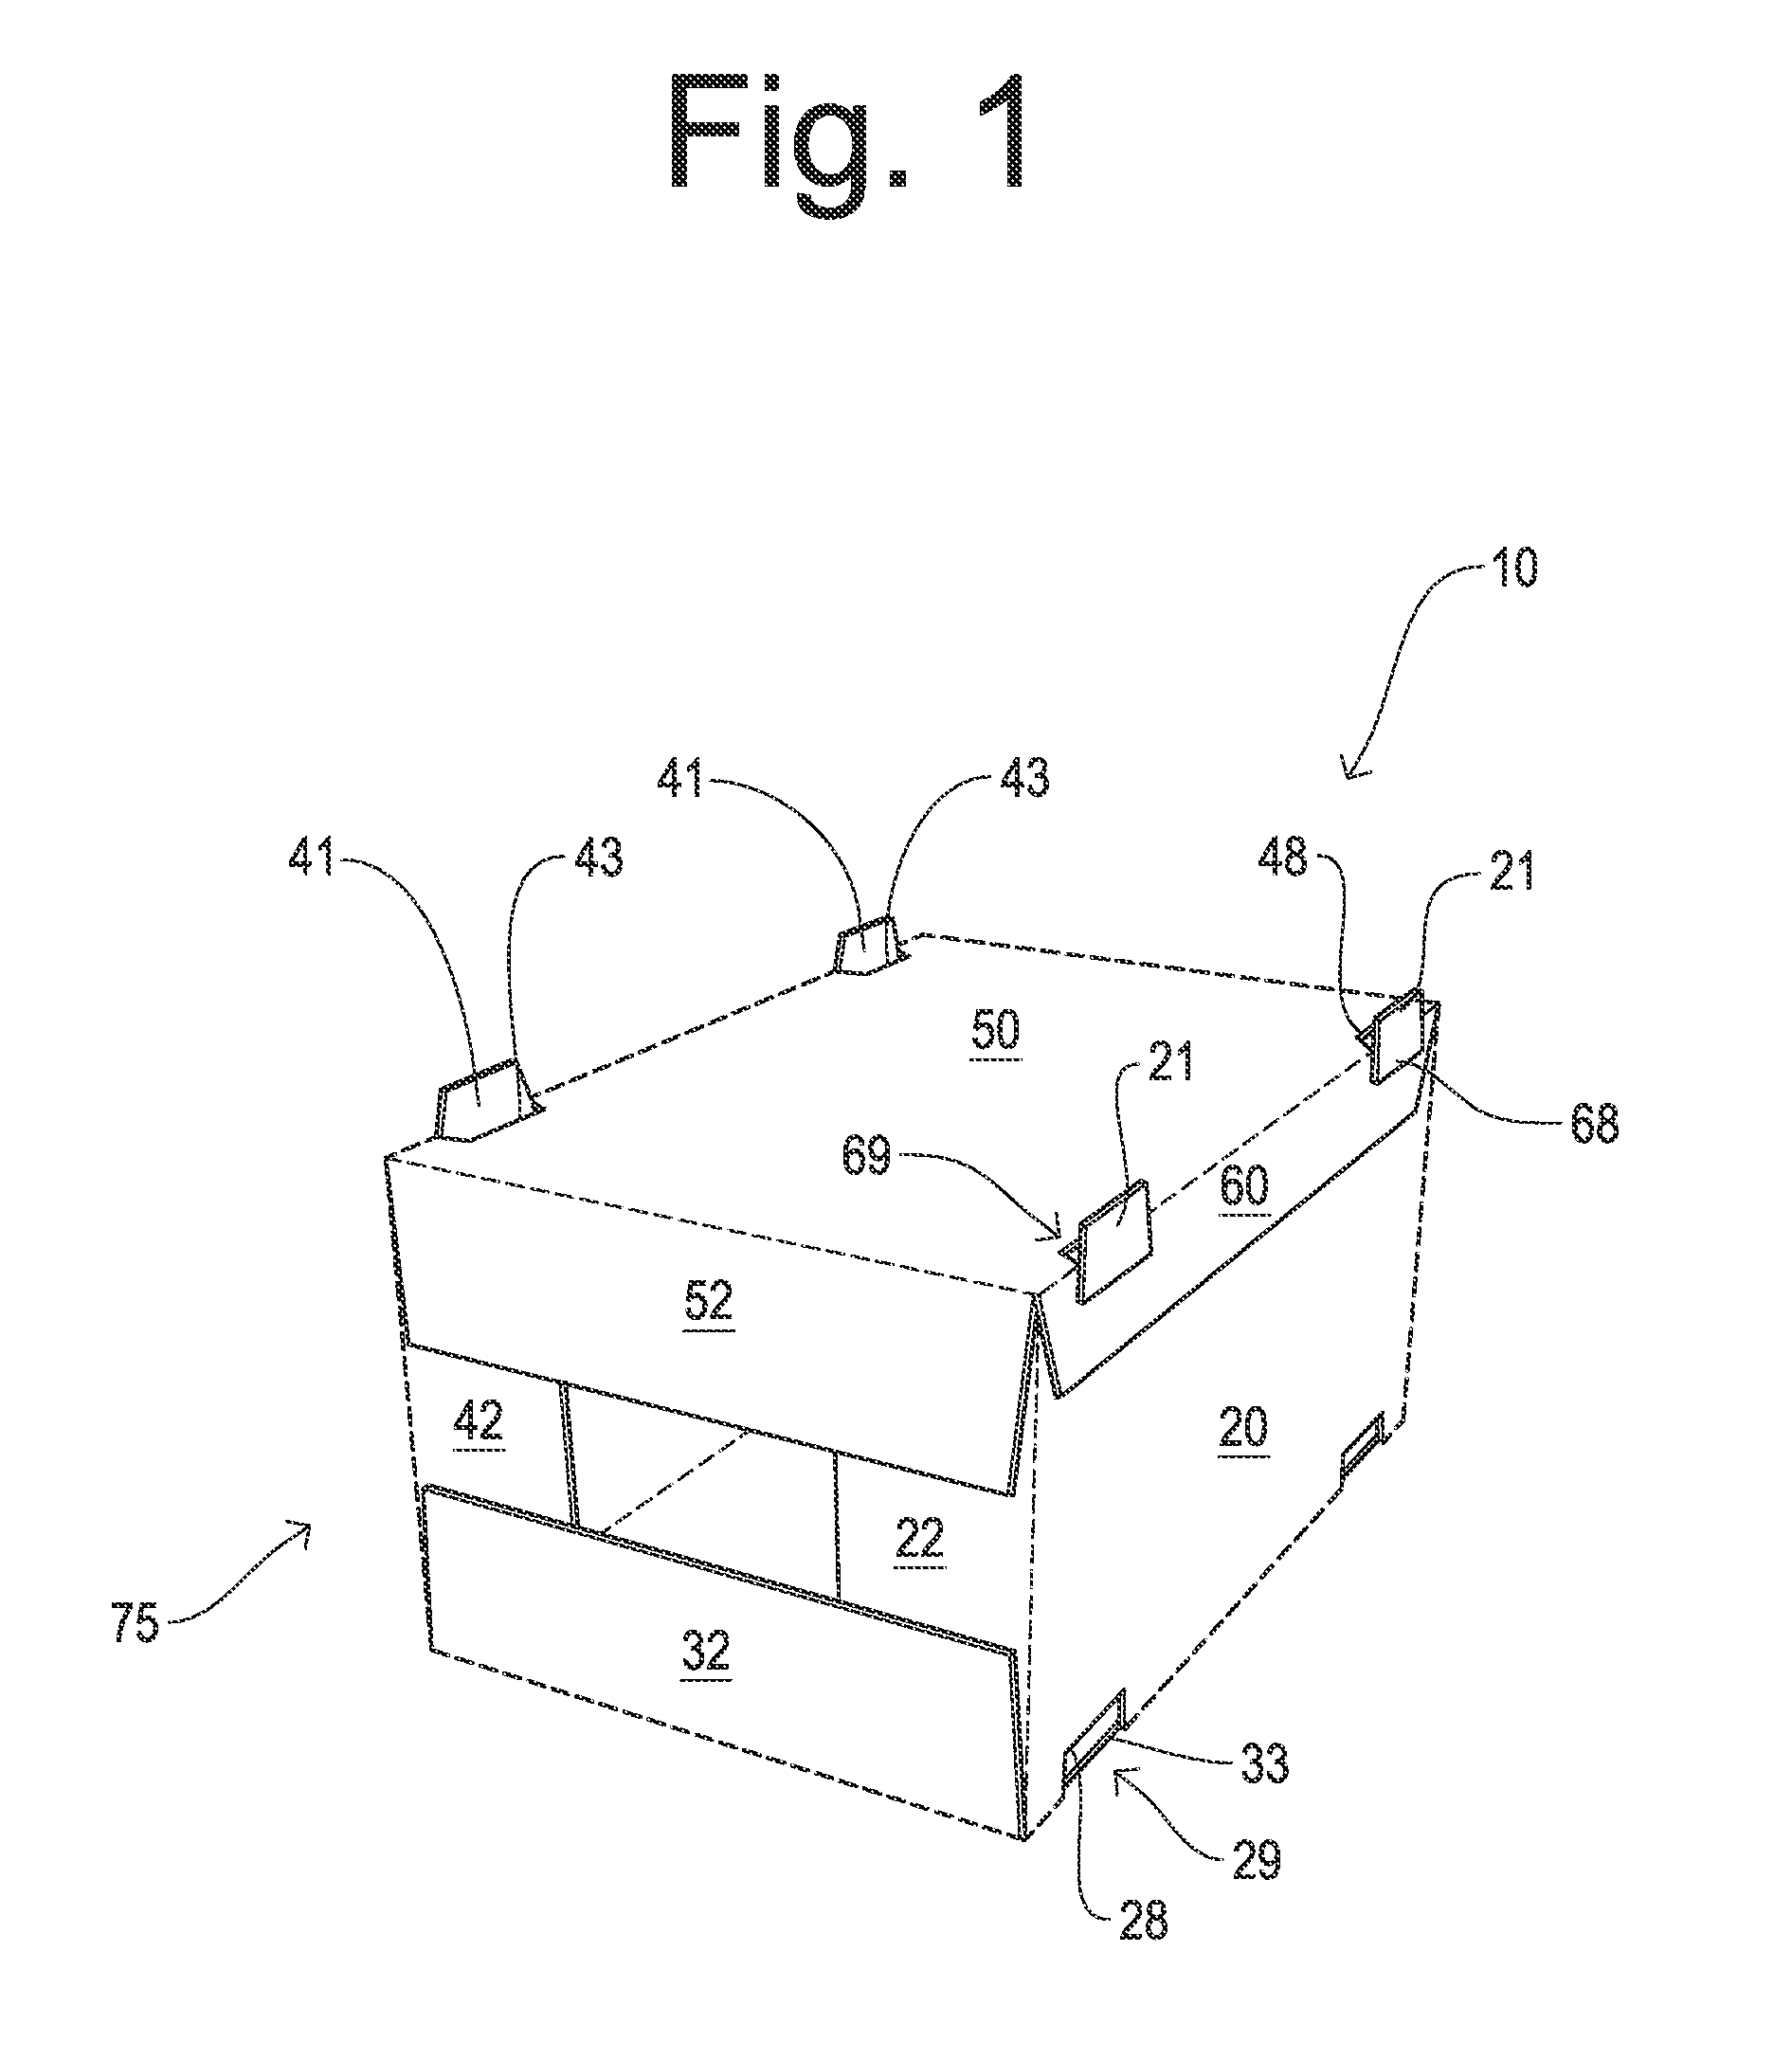 Wraparound Shipping Box Blank with System and Method of Forming Blank into a Shipping Case